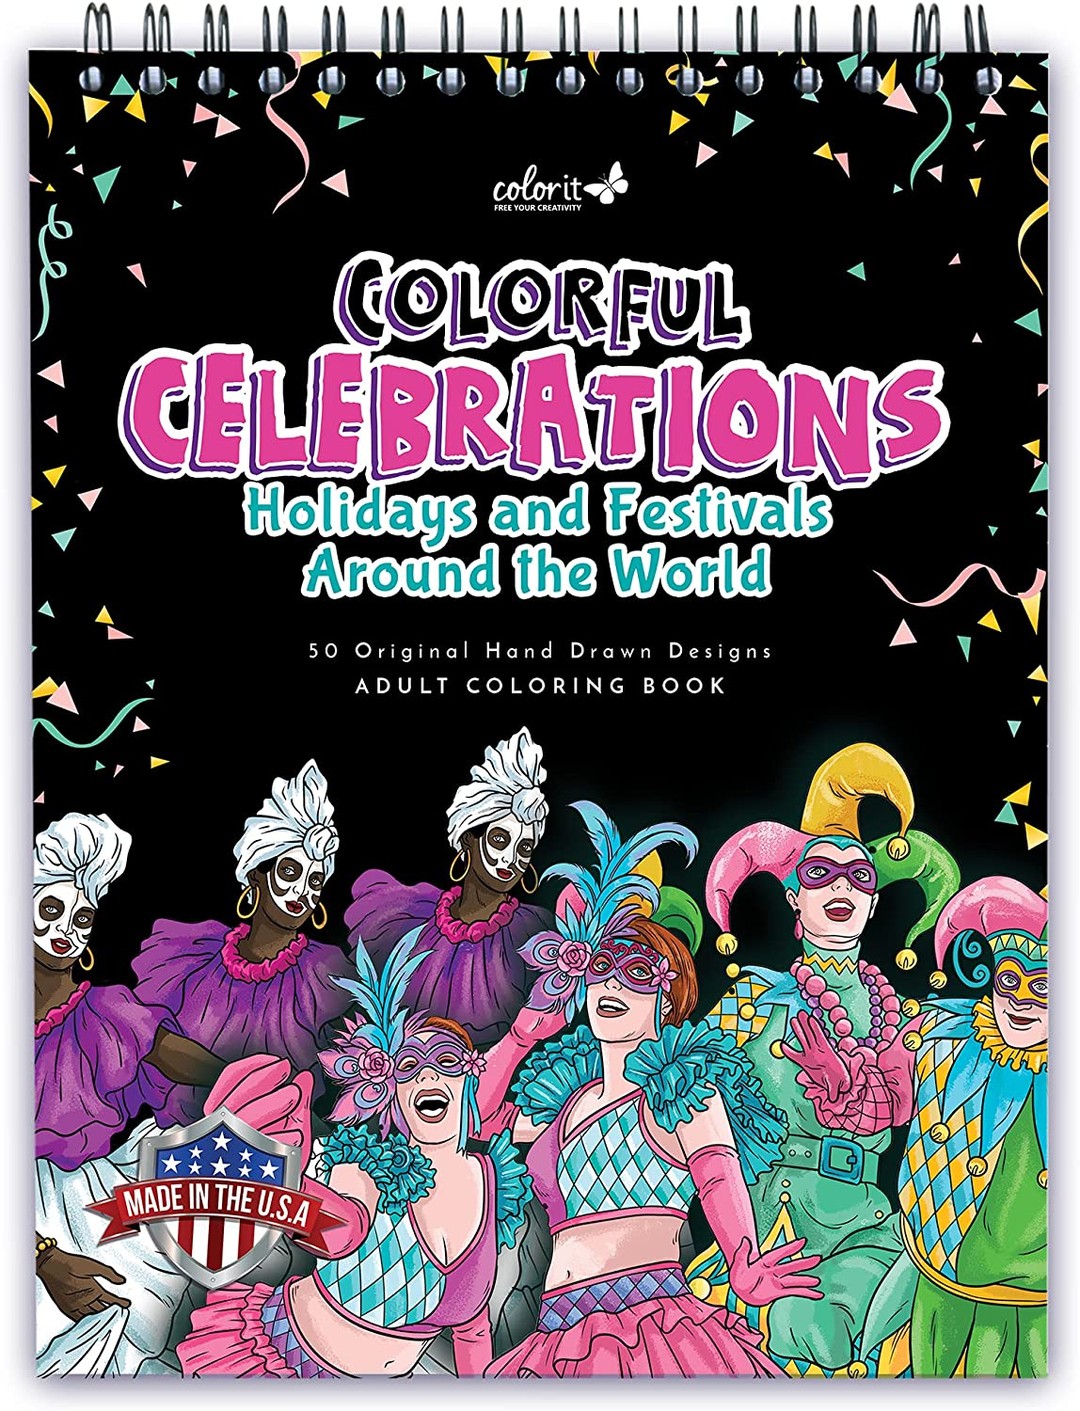 Colorful Celebrations Illustrated By Hasby Mubarok